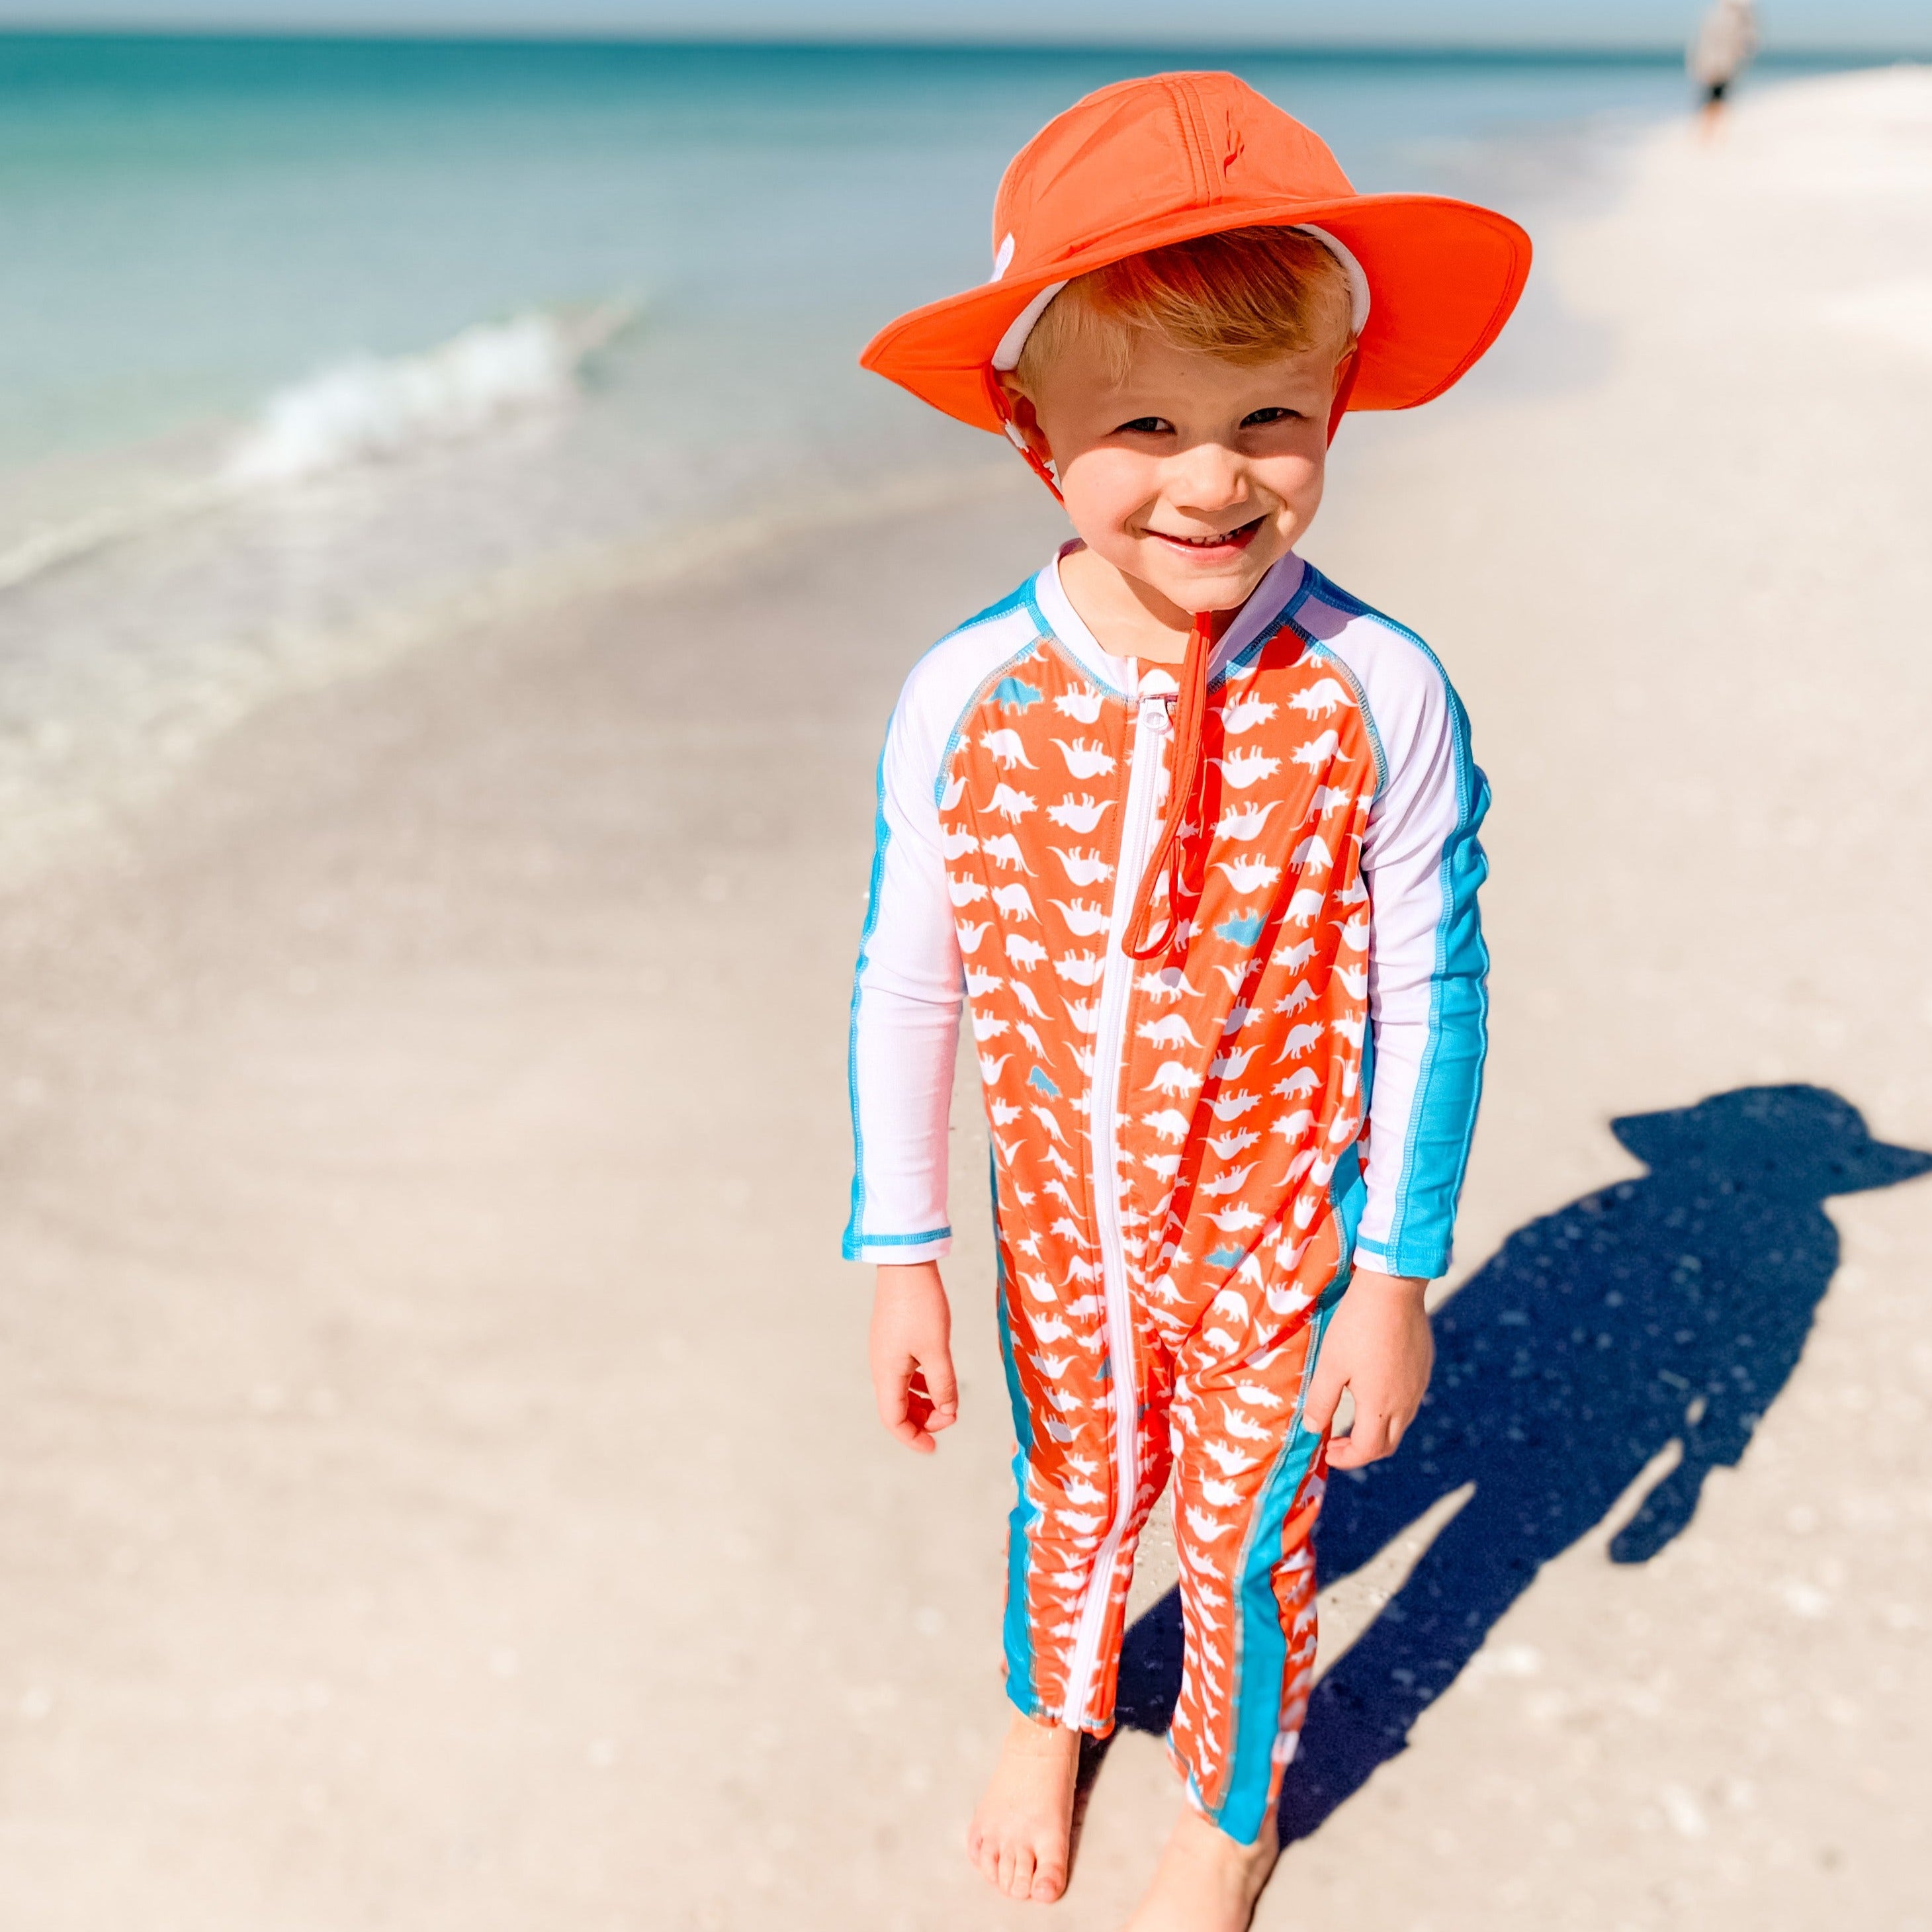 Little Girl In Swimming Hat And Pink Rash Top Playing In Wet Sand At Beach  (selective Focus) Stock Photo, Picture and Royalty Free Image. Image  71866155.